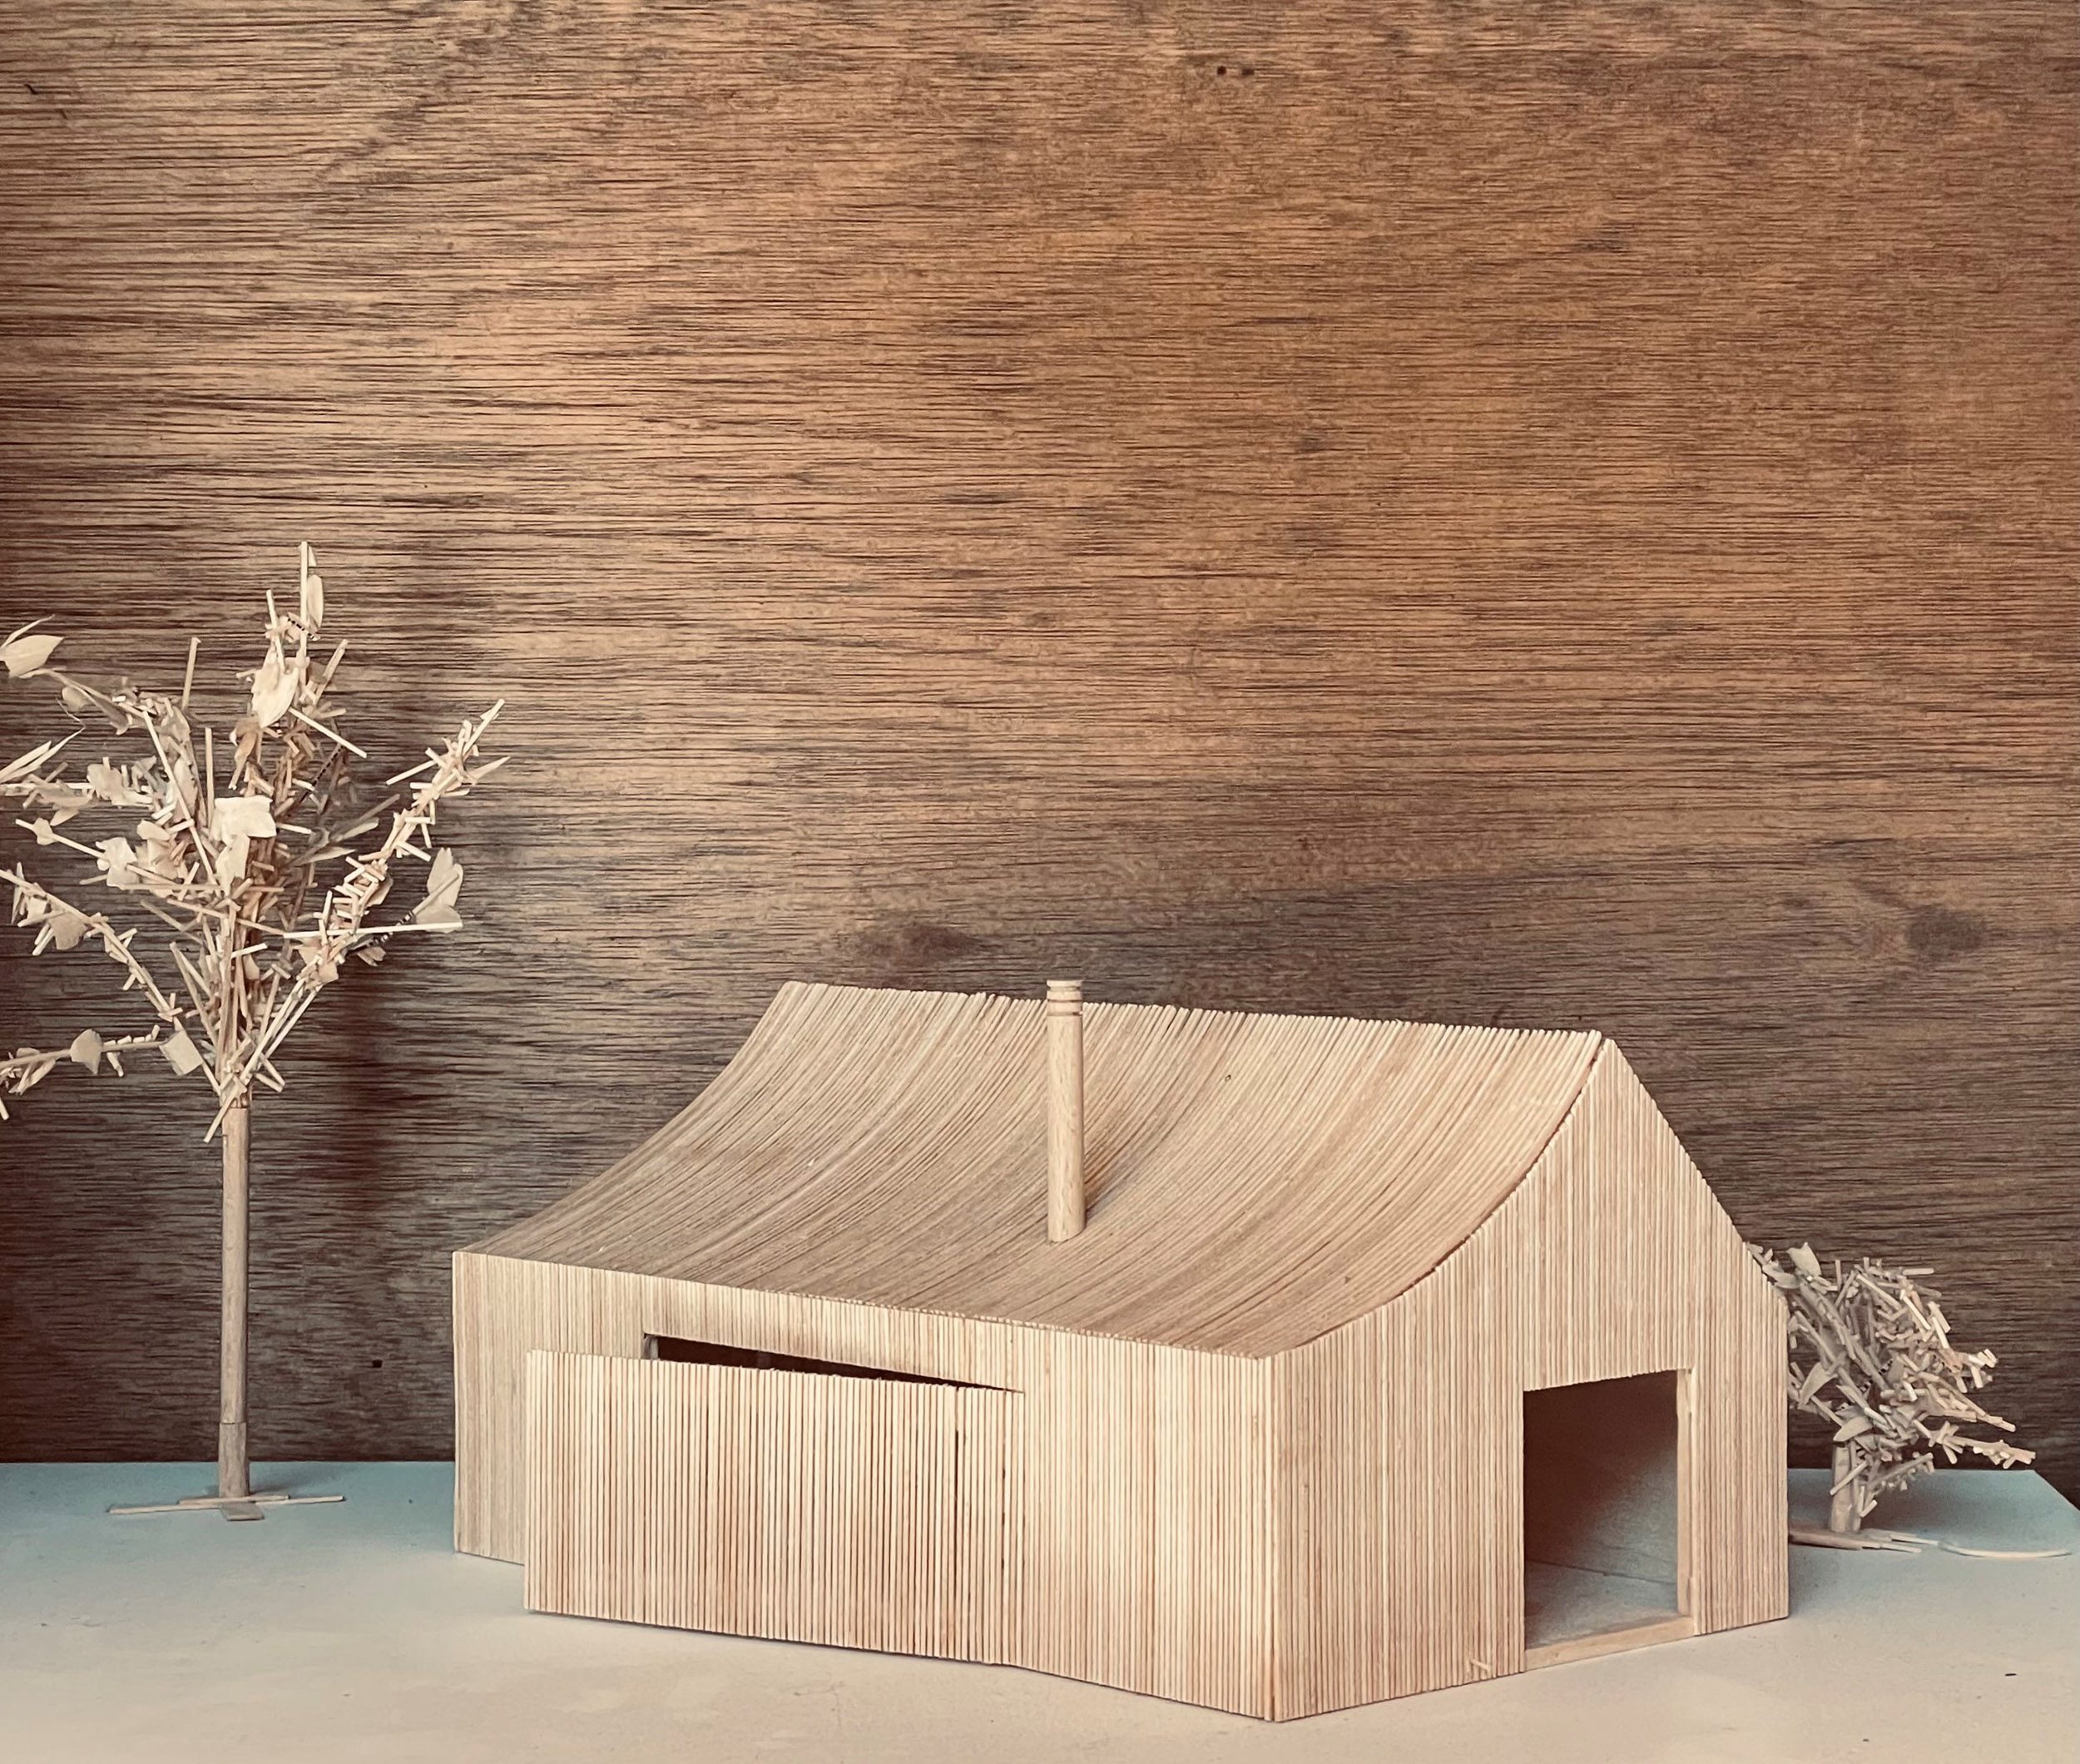 Wooden model of Shady Shed